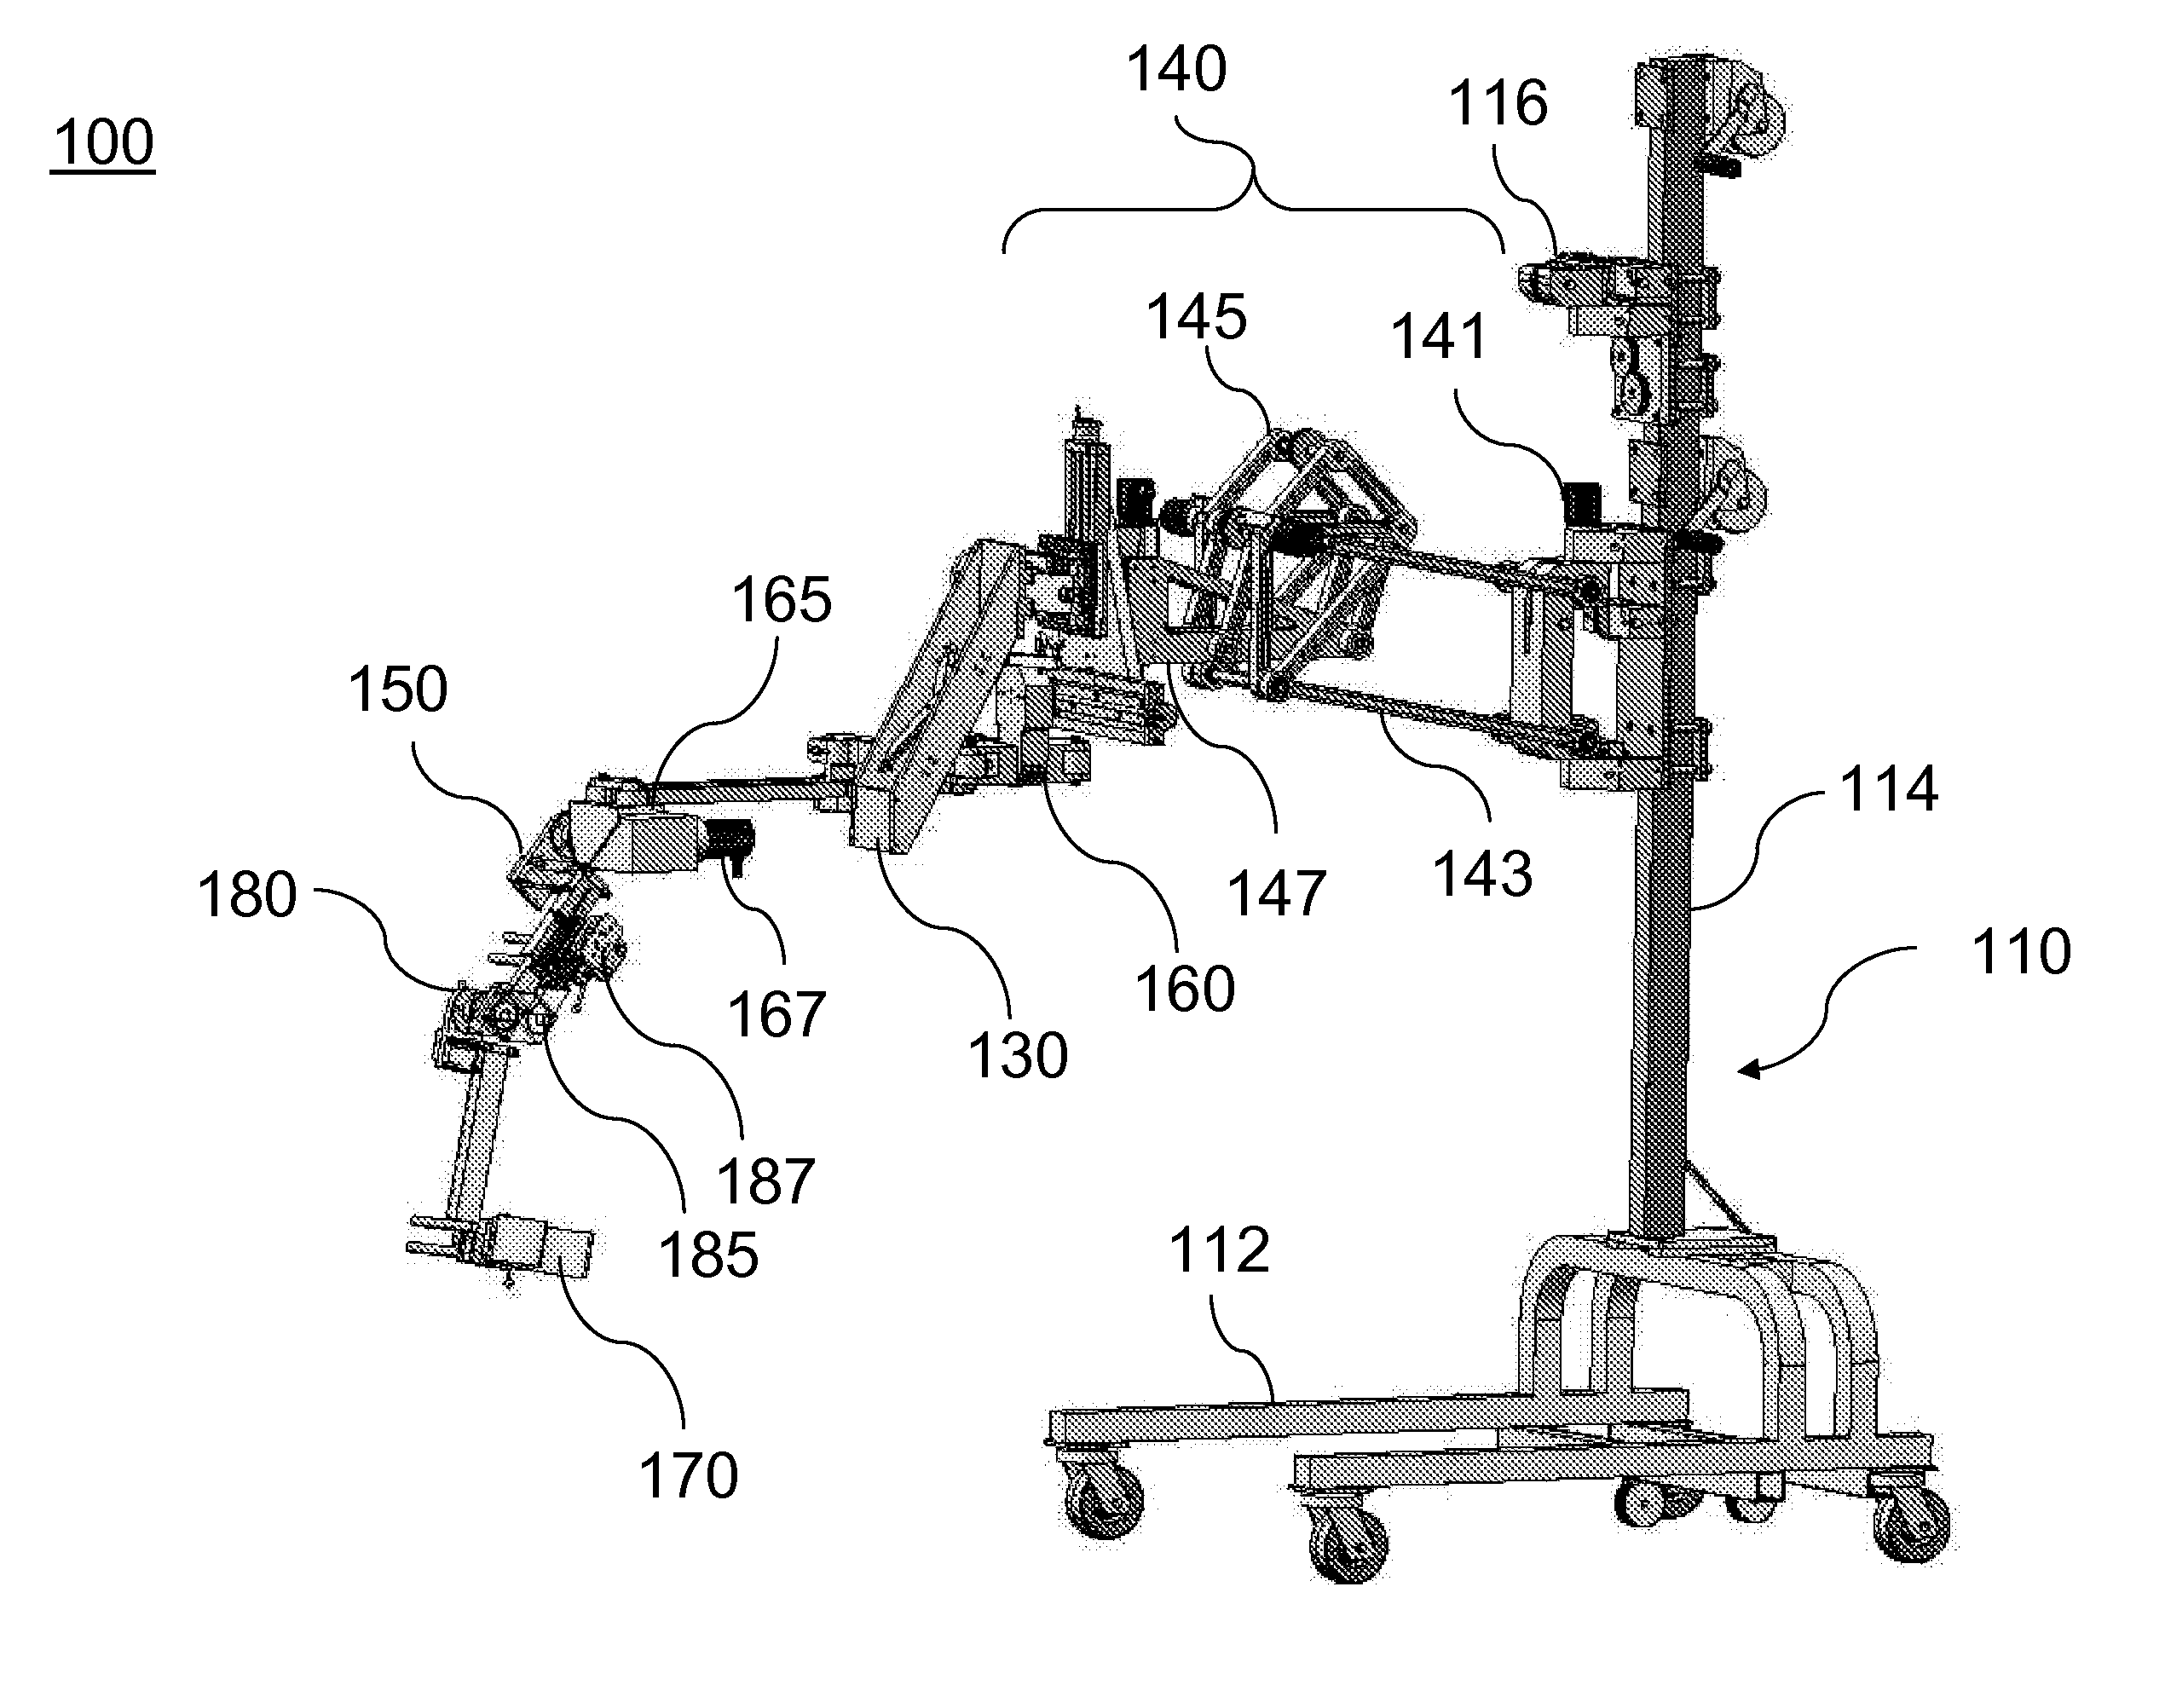 Powered orthosis systems and methods